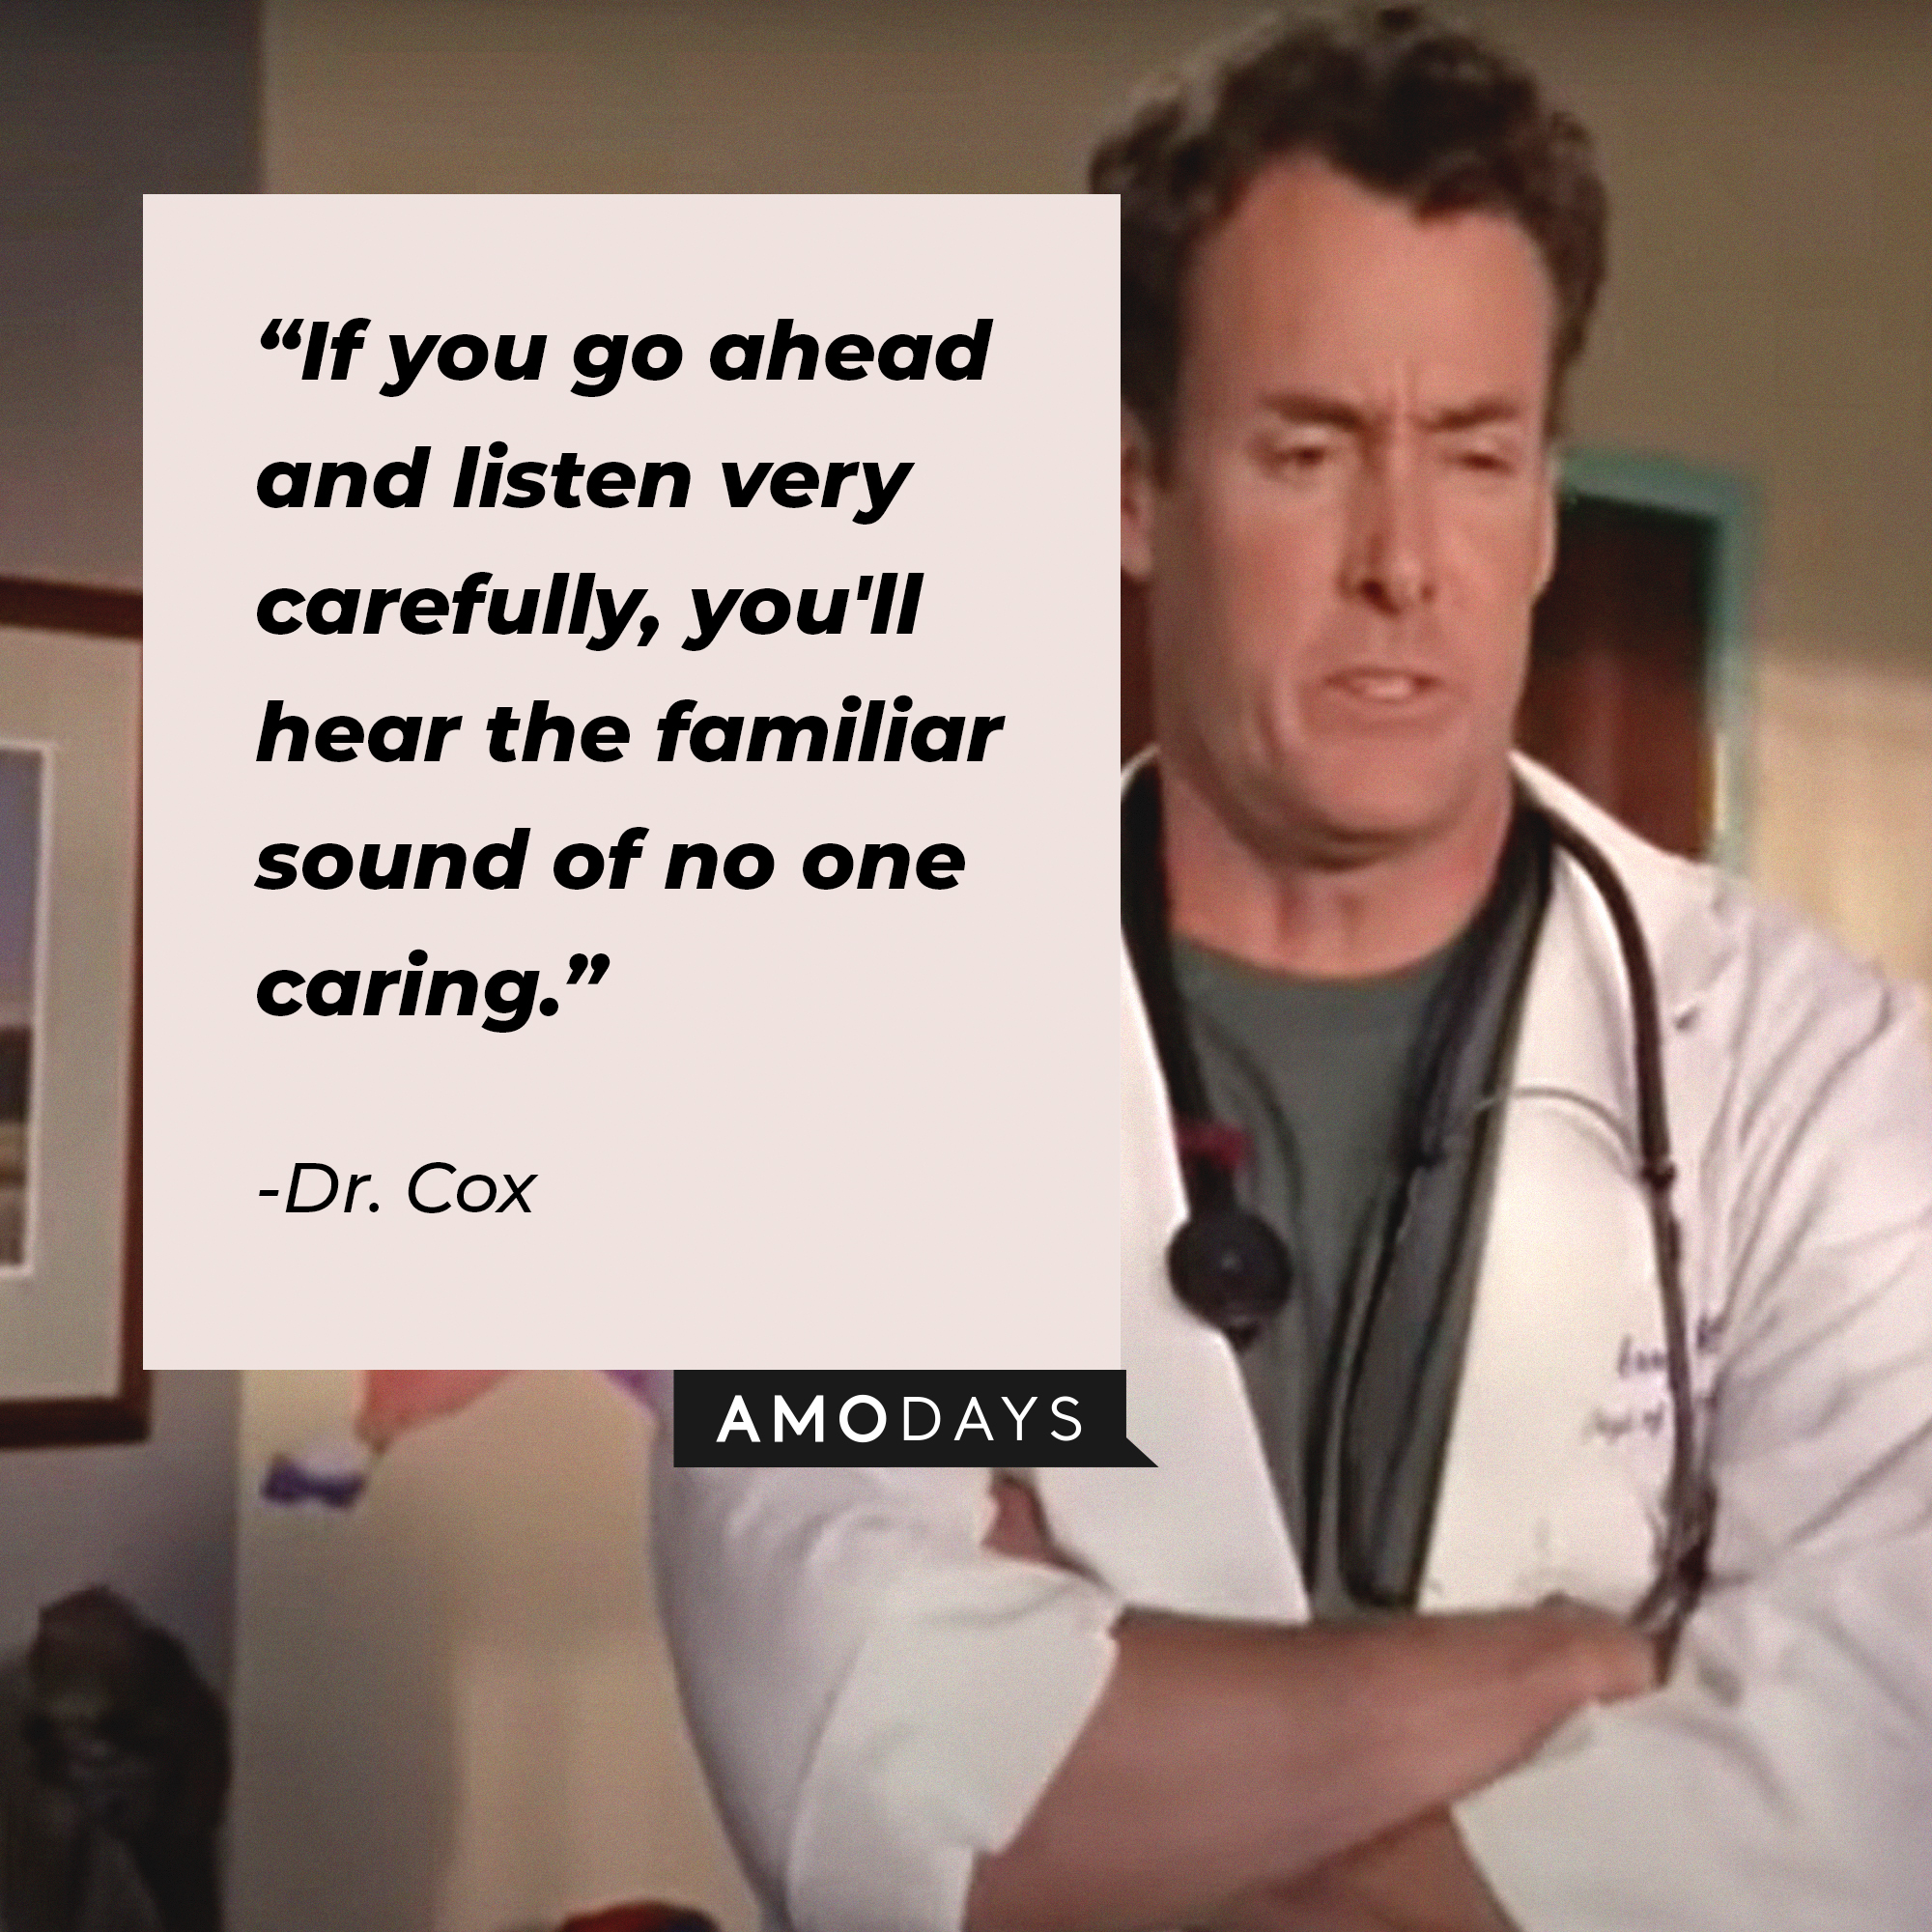 Dr. Cox, with his quote: “If you go ahead and listen very carefully, you'll hear the familiar sound of no one caring.” | Source: facebook.com/scrubs